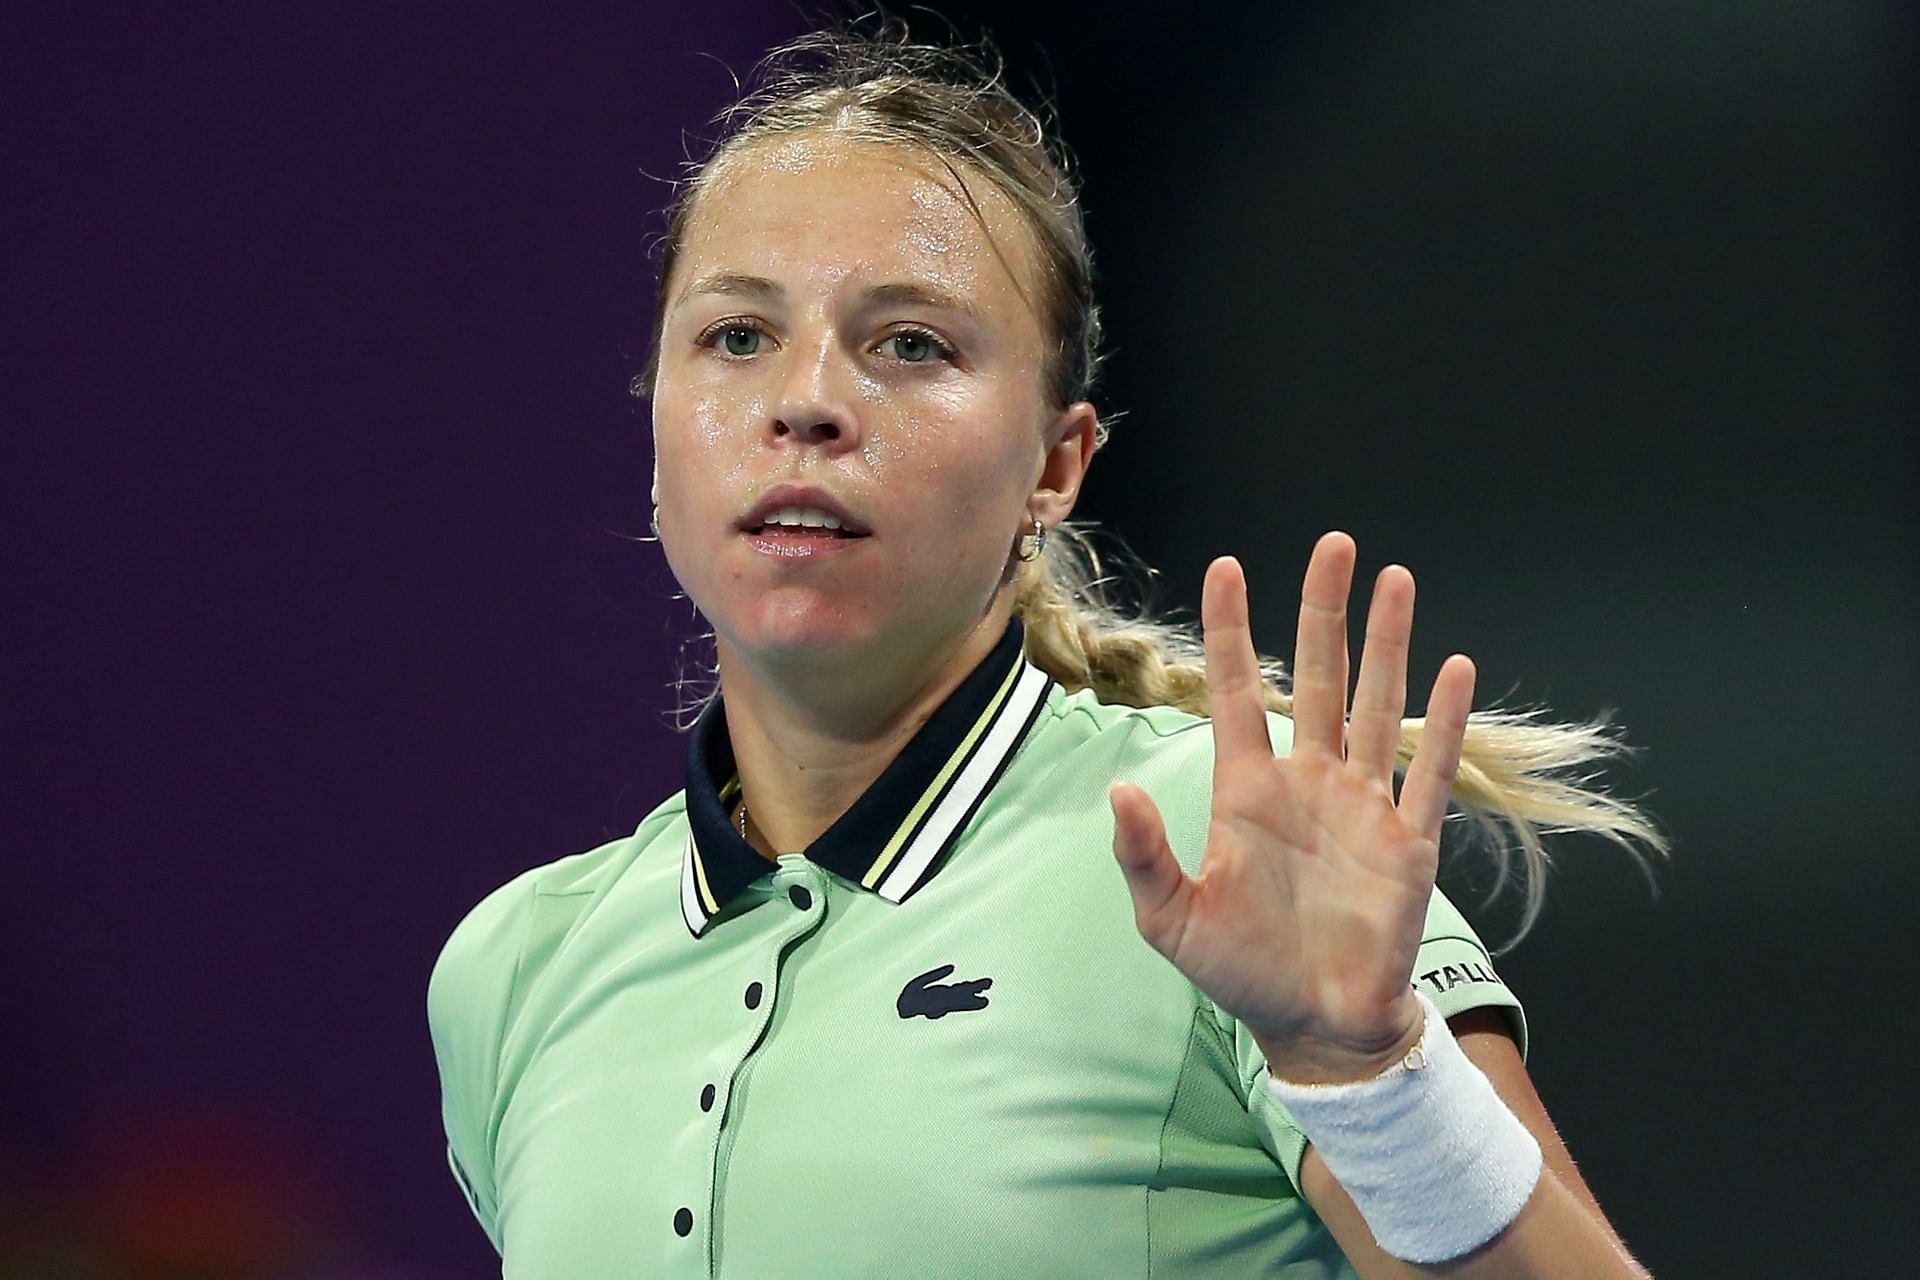 Kontaveit will be a favorite to win on paper.